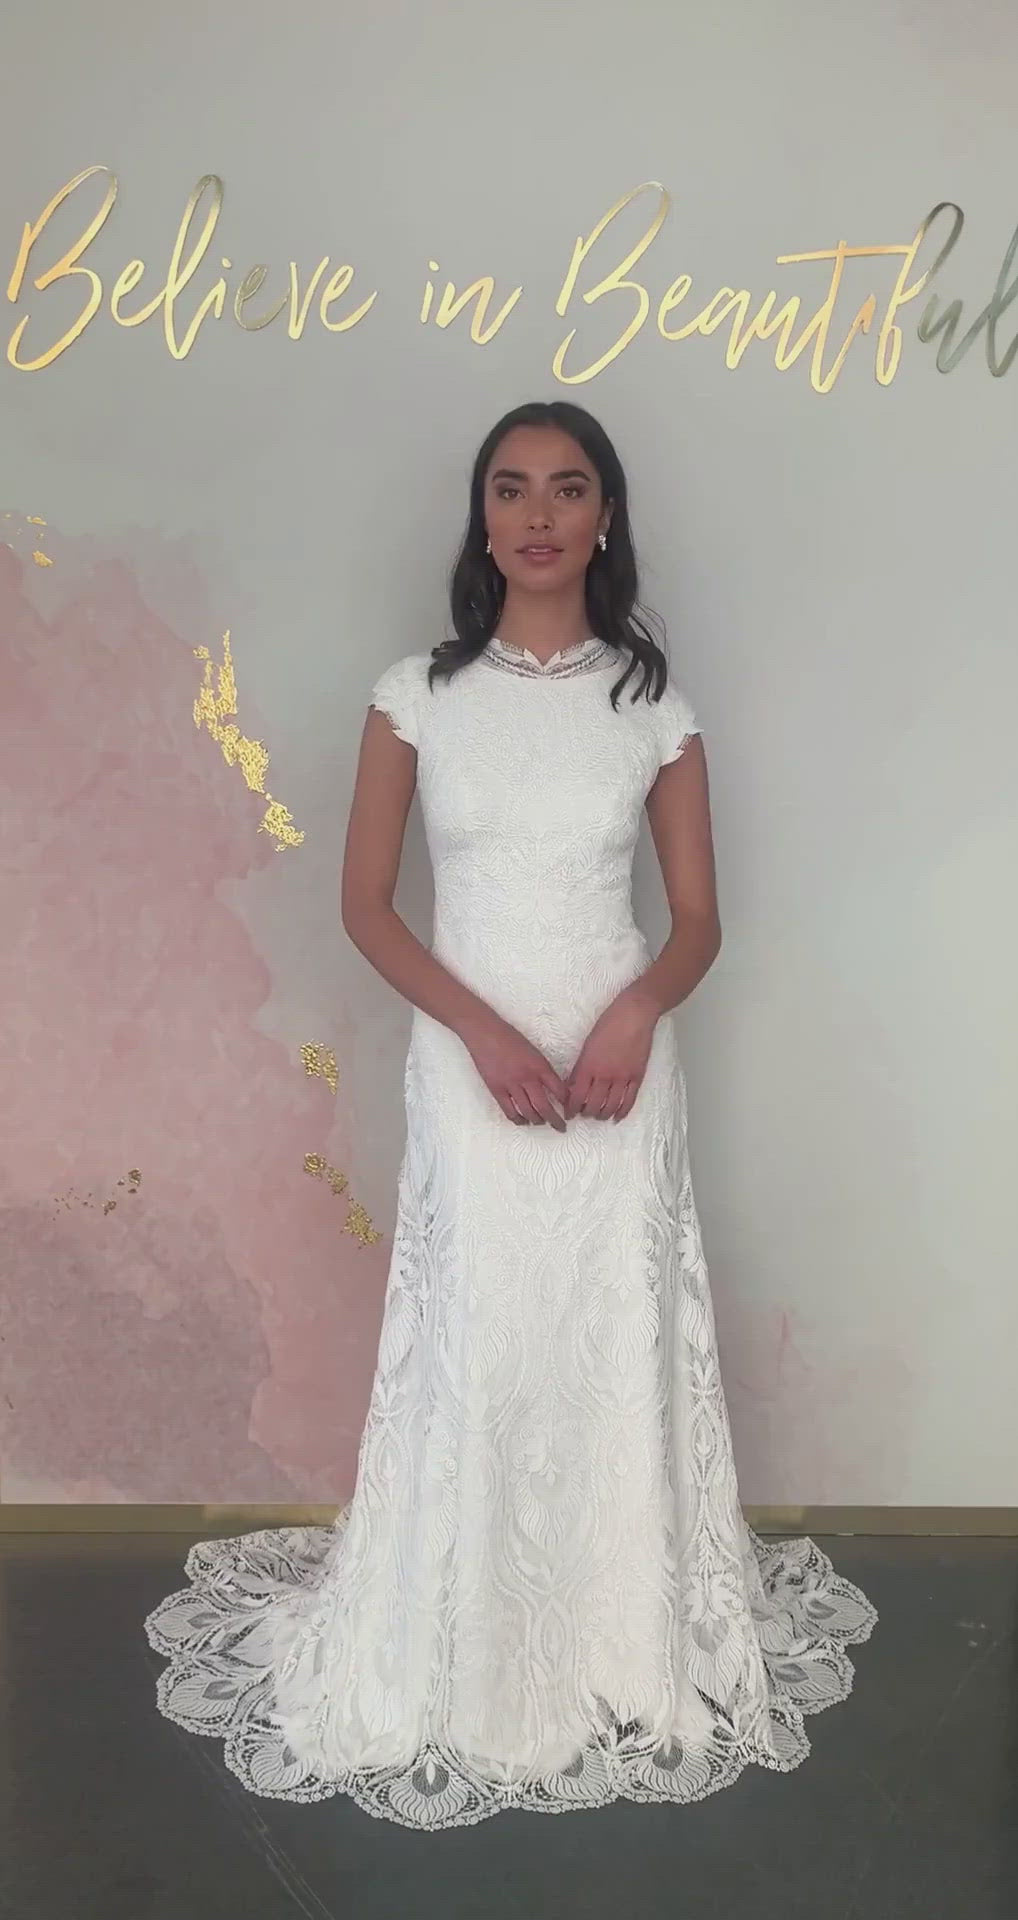 A video featuring our Mary wedding dress and its stunning, unique lace pattern, chic high neckline, and sheath fit.